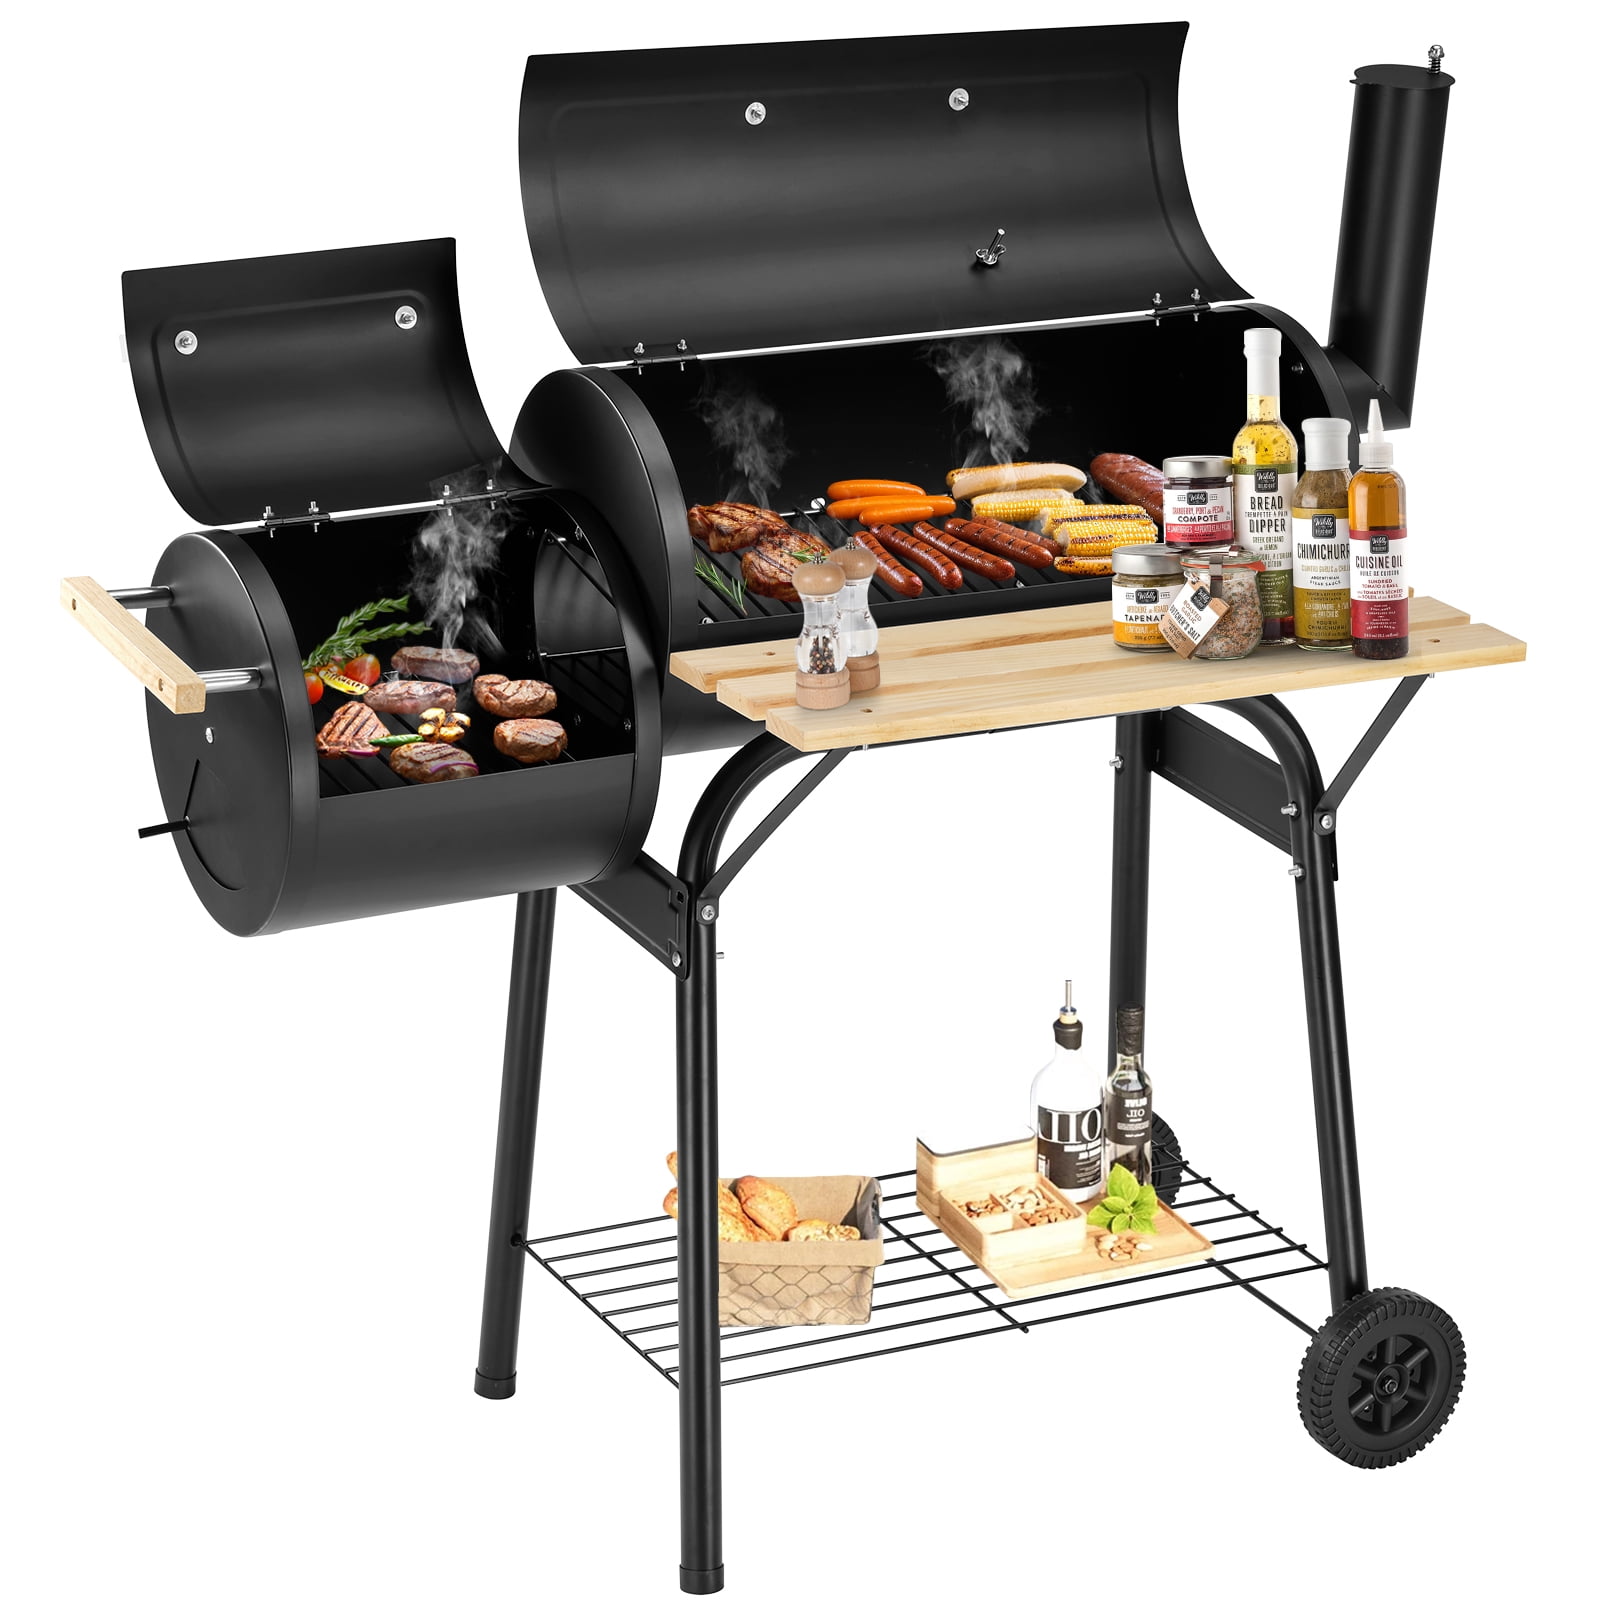  Primst Multifunctional Charcoal Barbecue Grill, Household Korean  BBQ Grill, Portable Camping Grill Stove, Tabletop Smoker Grill : Patio,  Lawn & Garden